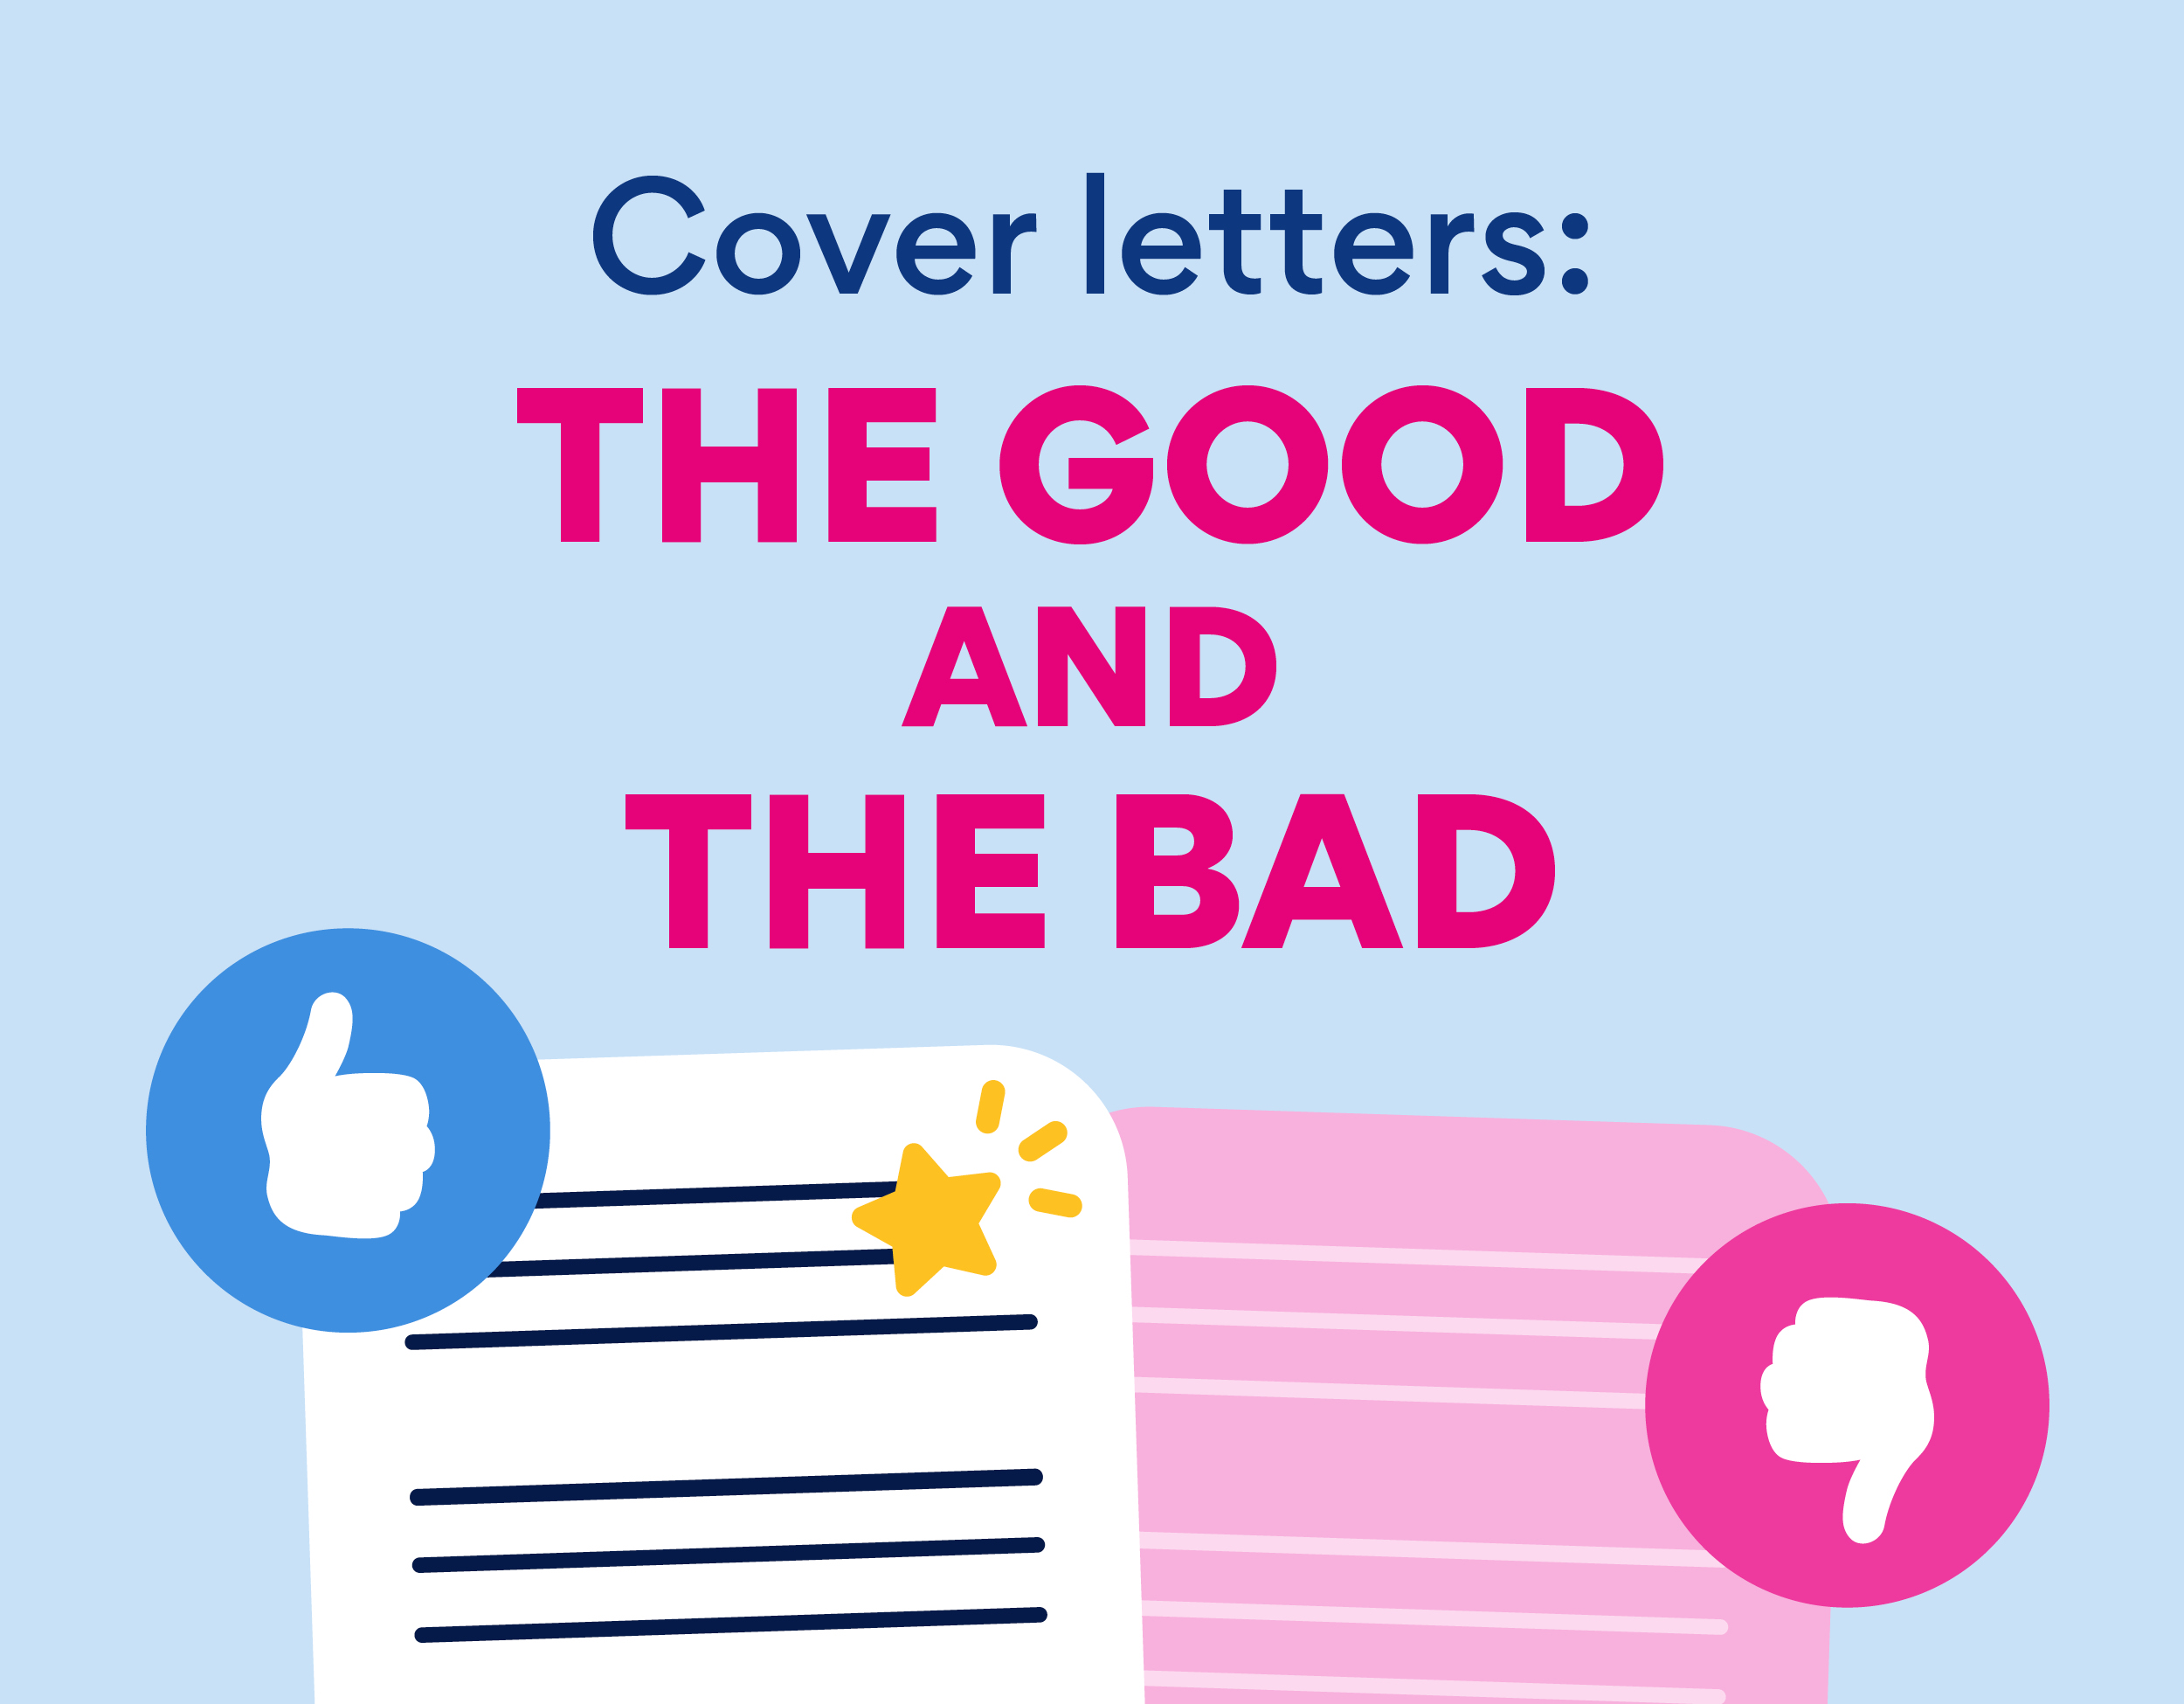 Cover letters: The good and the bad